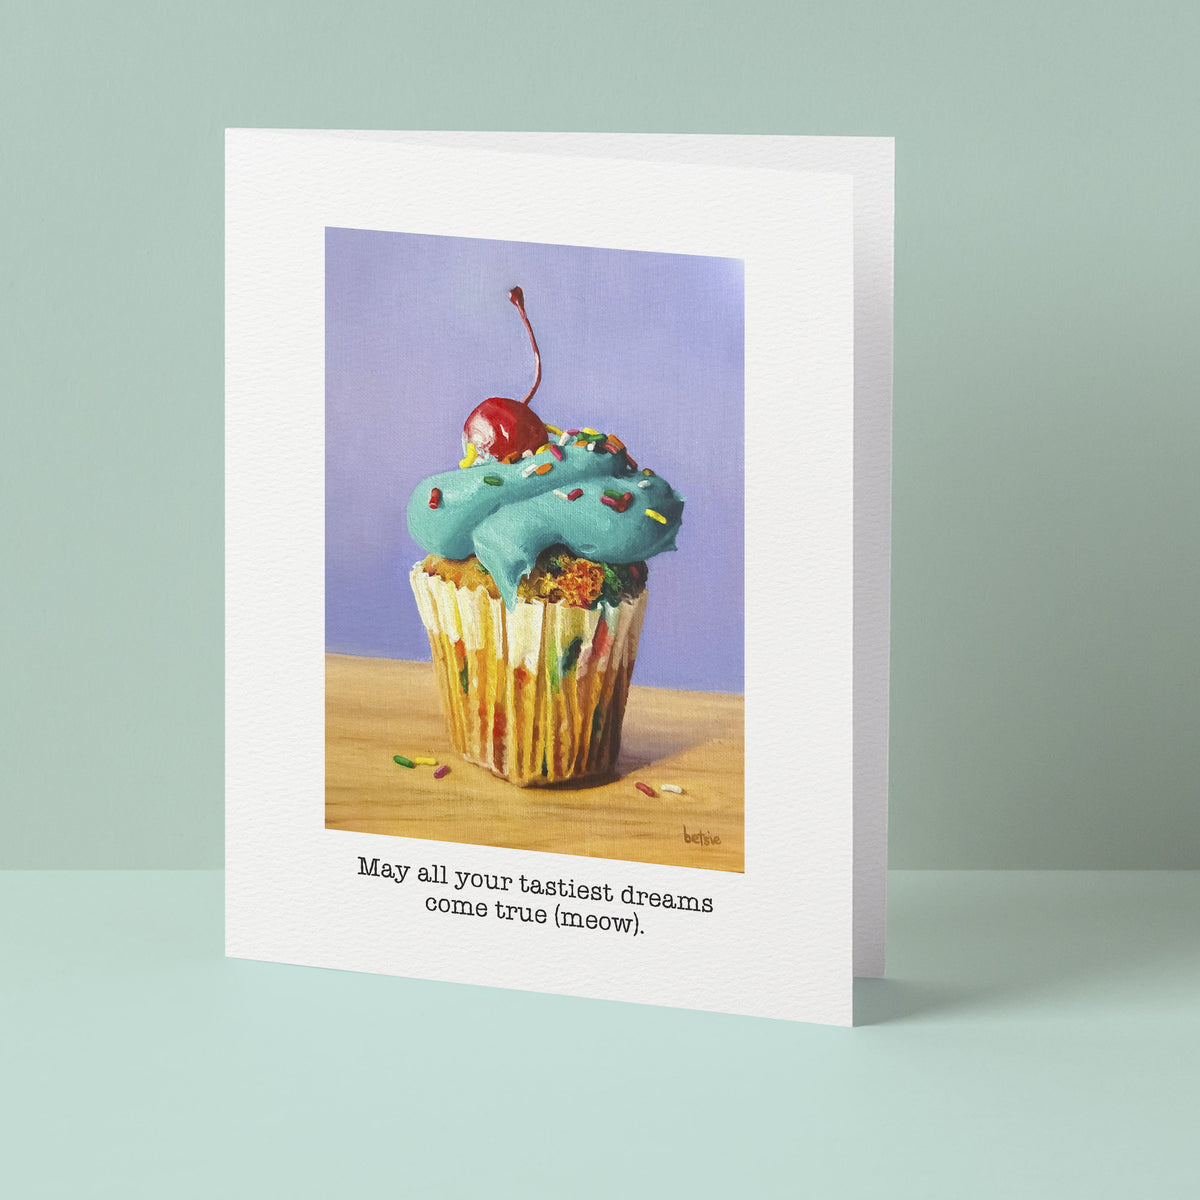 "May all your tastiest dreams come true" Greeting Card